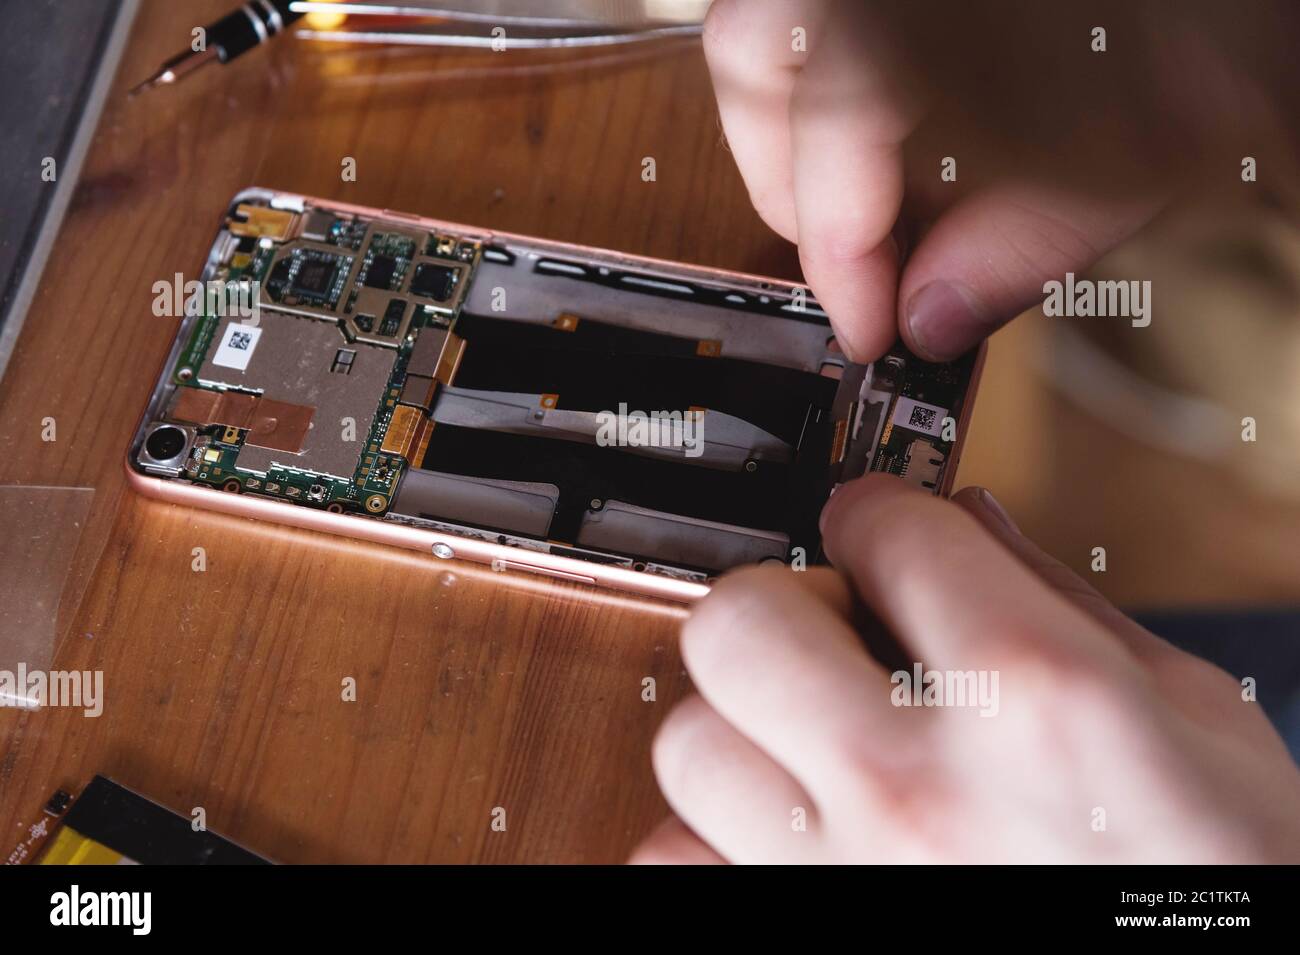 Close-up of the hand of a home craftsman repairing a disassembled smartphone. The concept of self-repair electronics at home Stock Photo